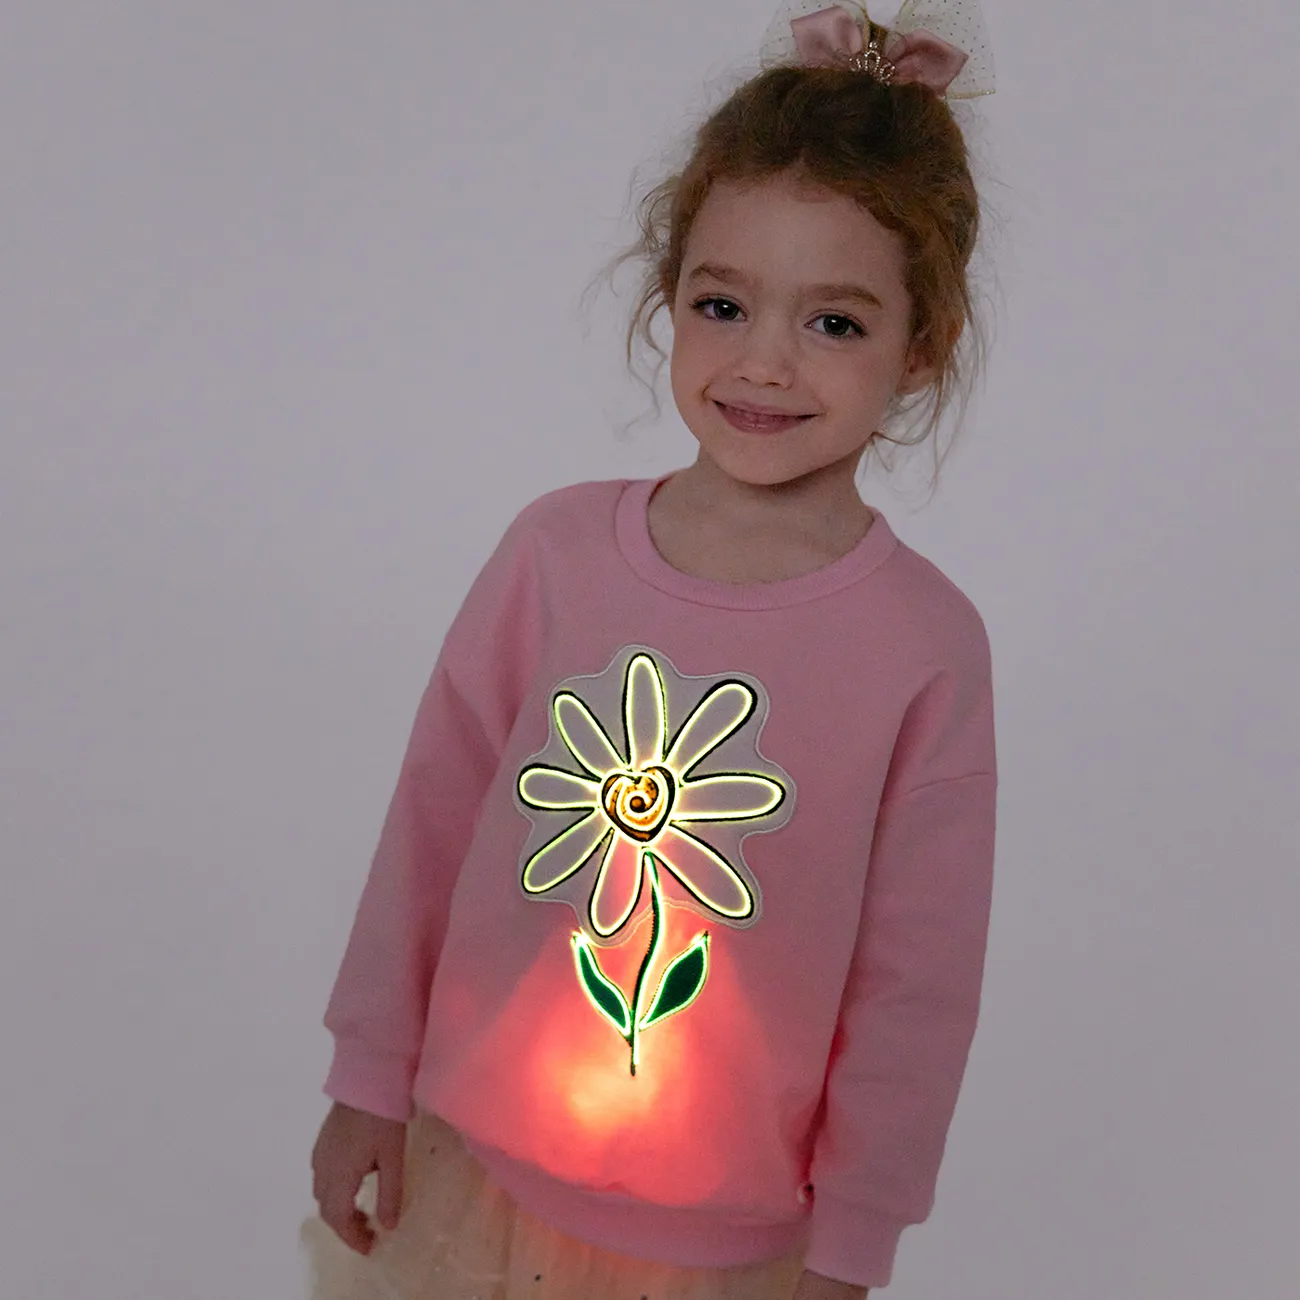 Go-Glow Illuminating Sweatshirt with Light Up Flower Pattern Including Controller (Built-In Battery) Pink big image 1